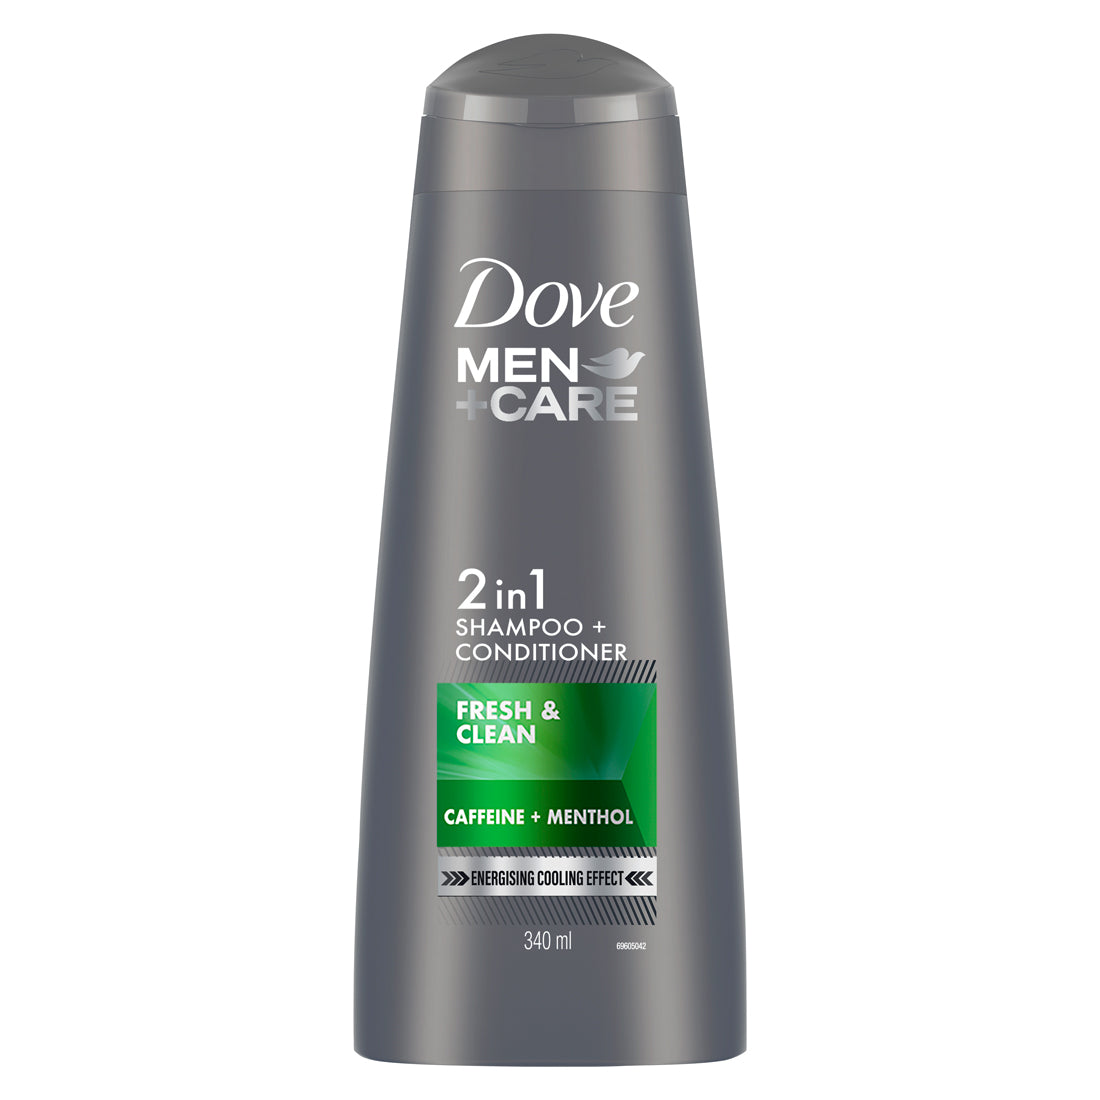 Dove Men+Care Fresh & Clean 2in1 Shampoo+Conditioner, 340 ml Combo (Pack of 3)